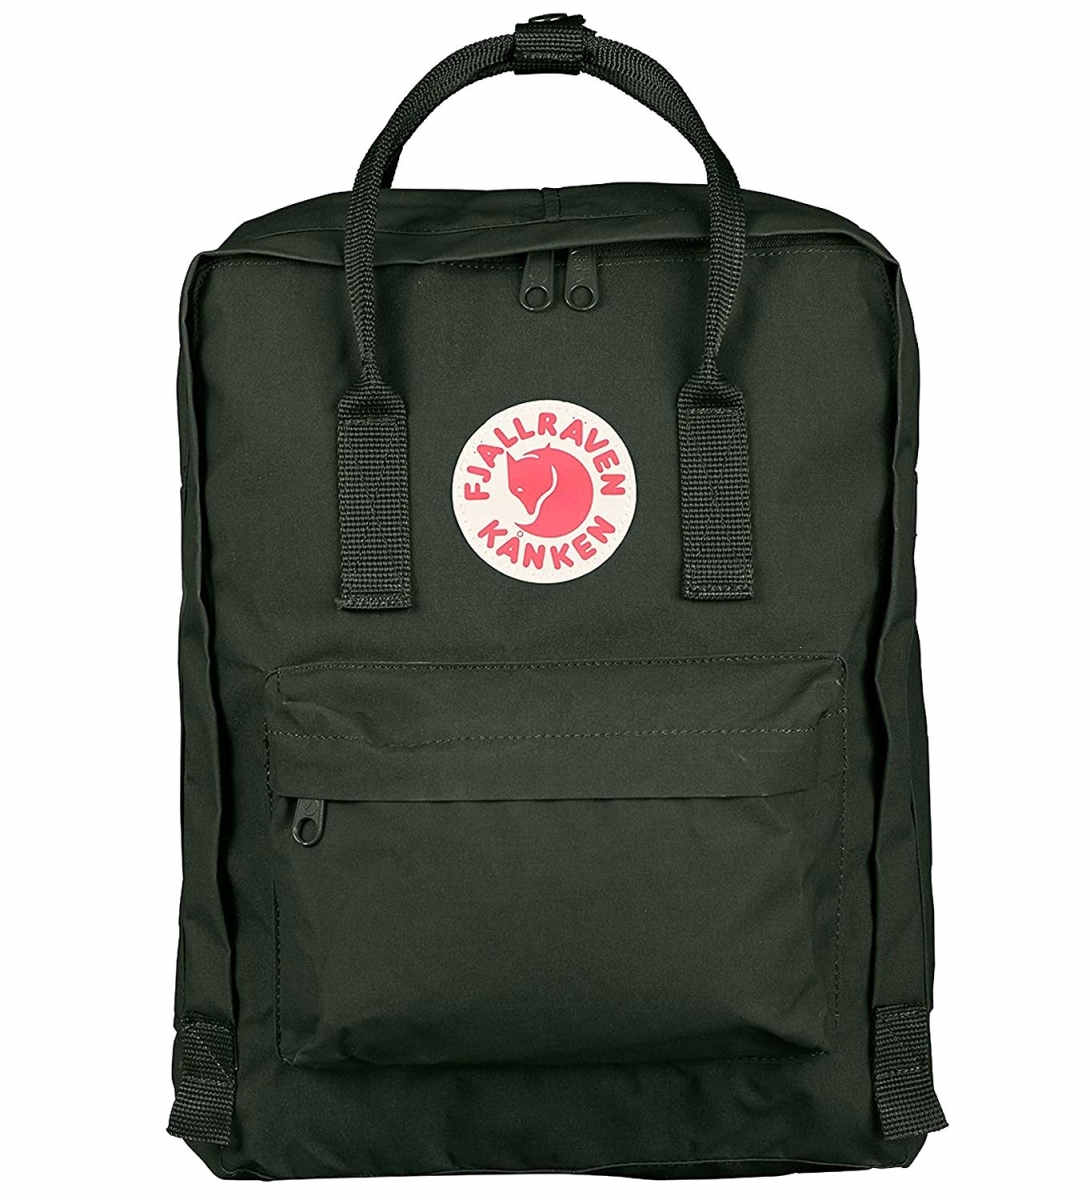 23510-662 Kanken Classic Backpack For Everyday - Deep Forest